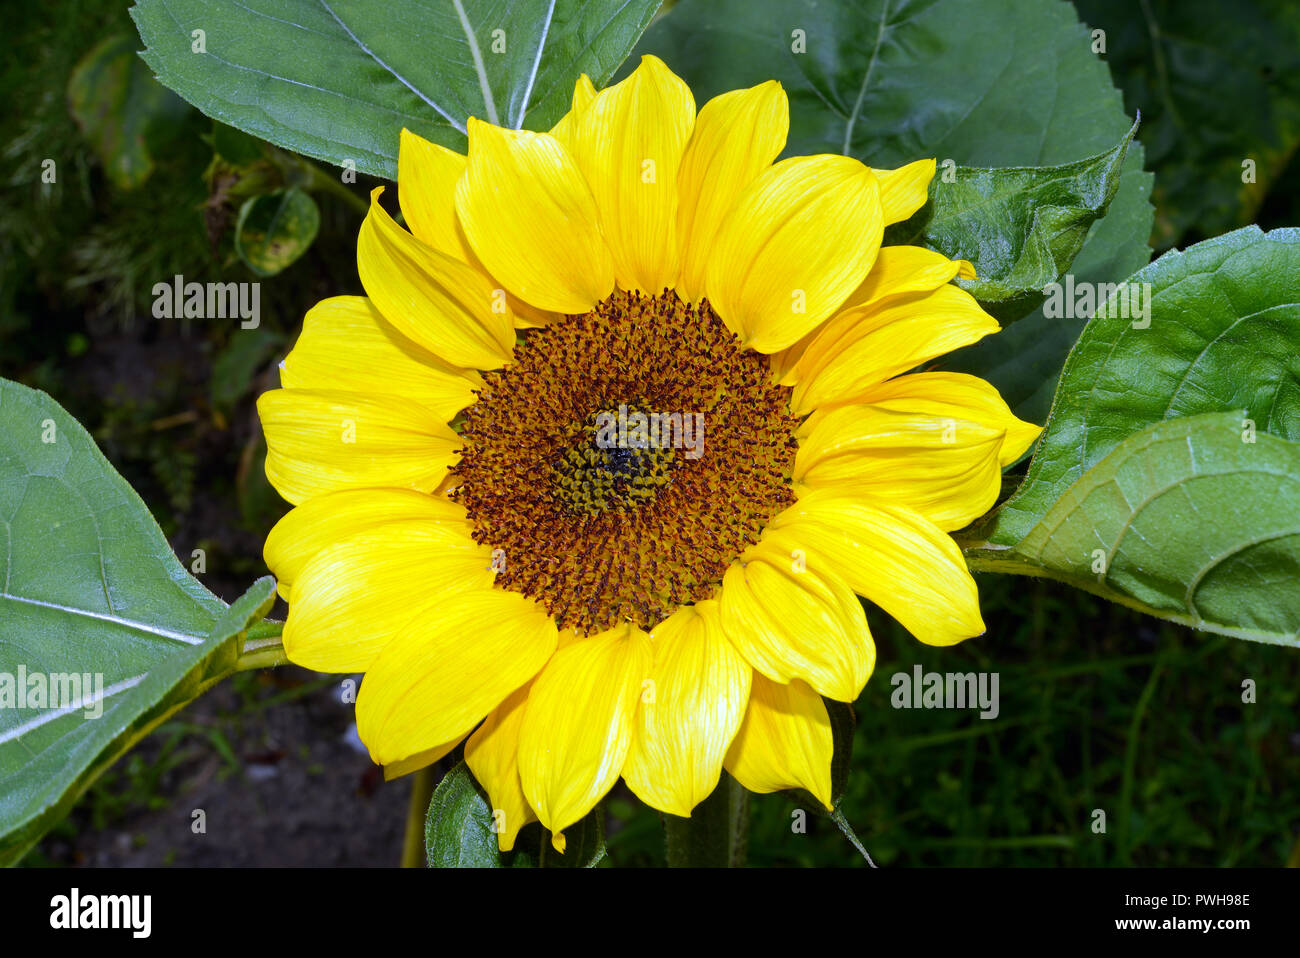 Helianthus annuus (common sunflower) native to the SW USA is now cultivated for its edible oil. The feral plant has probably become extinct. Stock Photo